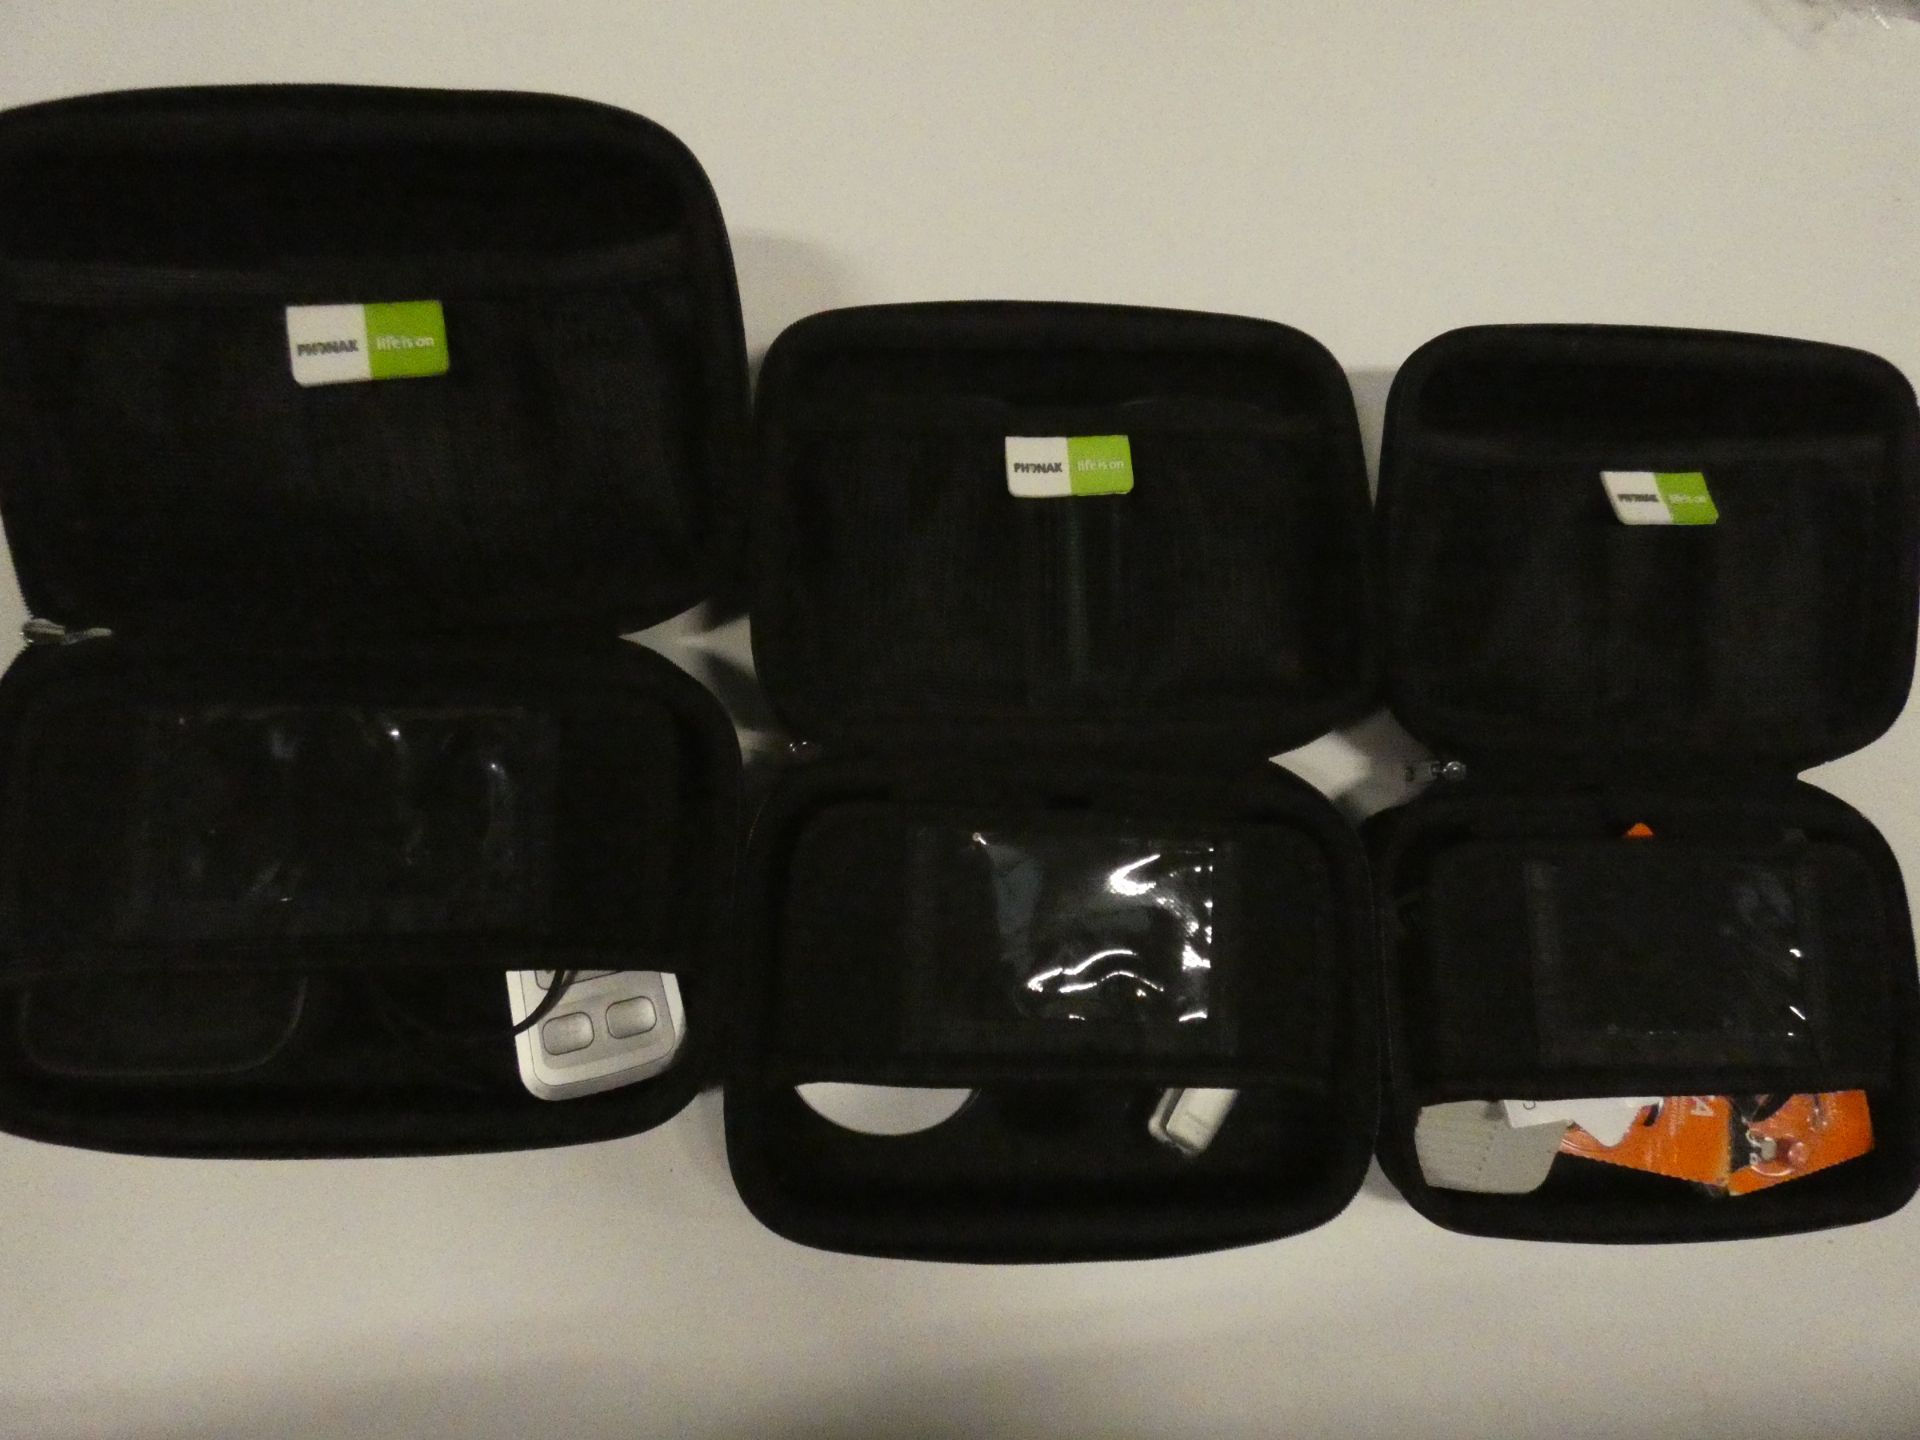 3x Phonax hearing aid cases with various hearing aid accessories